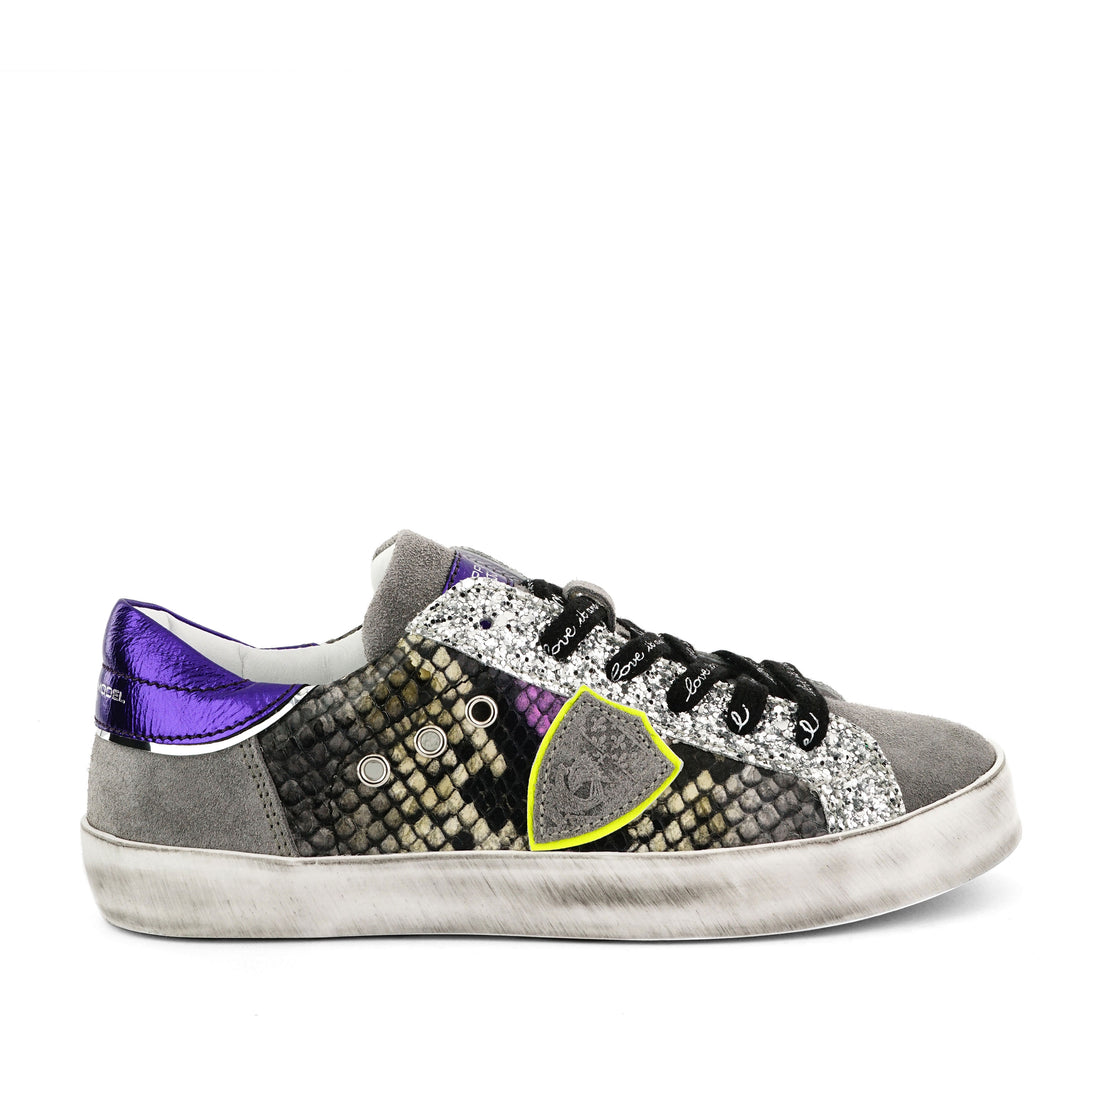 Philippe Model Grey/Silver/Violet/Neon Yellow Python Mix Sneakers